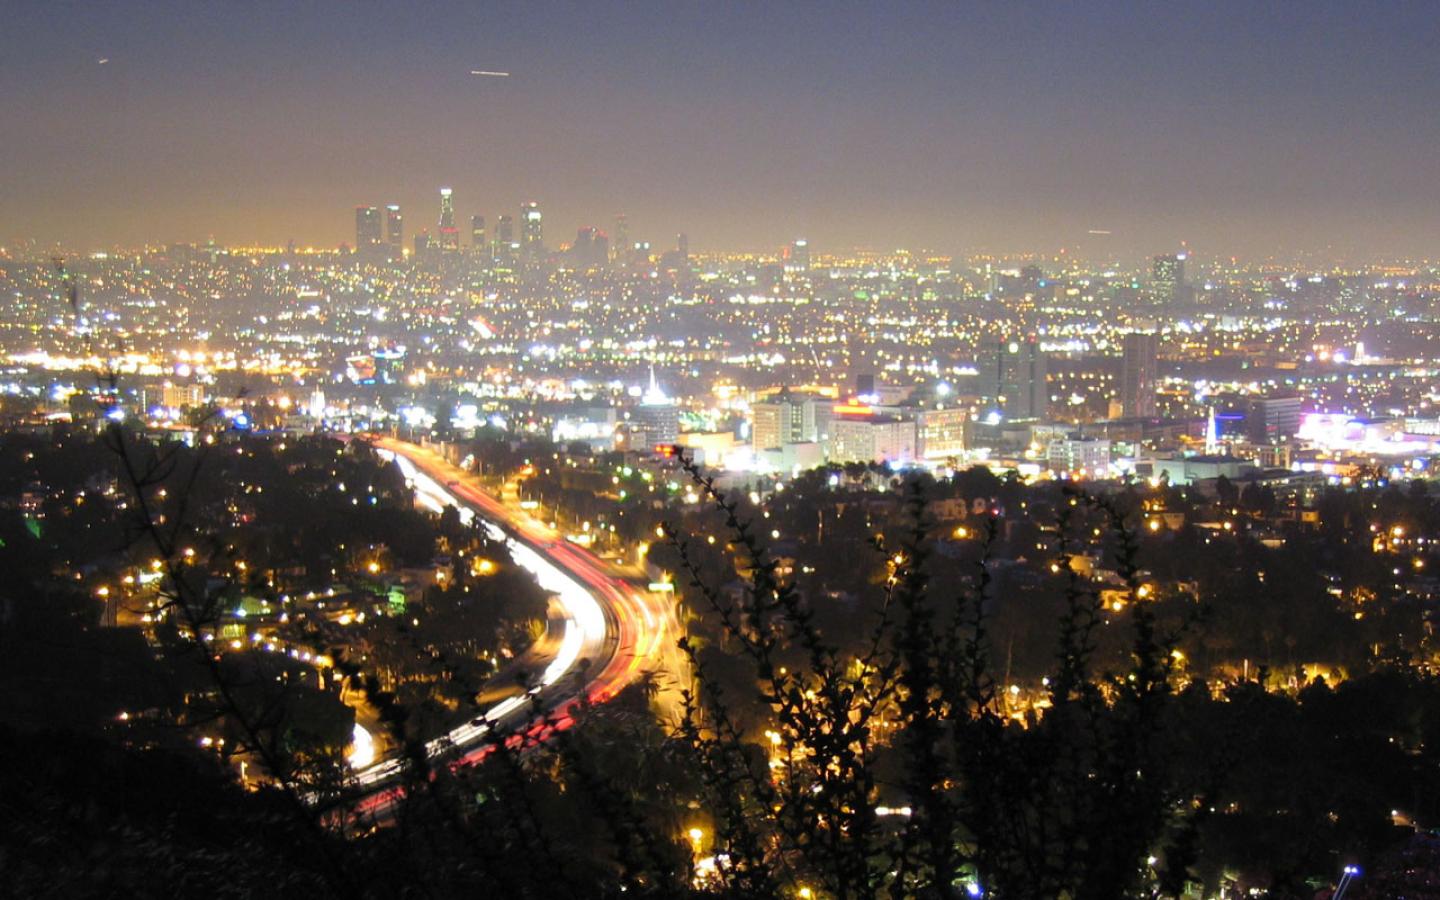 Los Angeles - City from Hollywood Hills (Anders Brownworth) Wallpaper #1 1440 x 900 